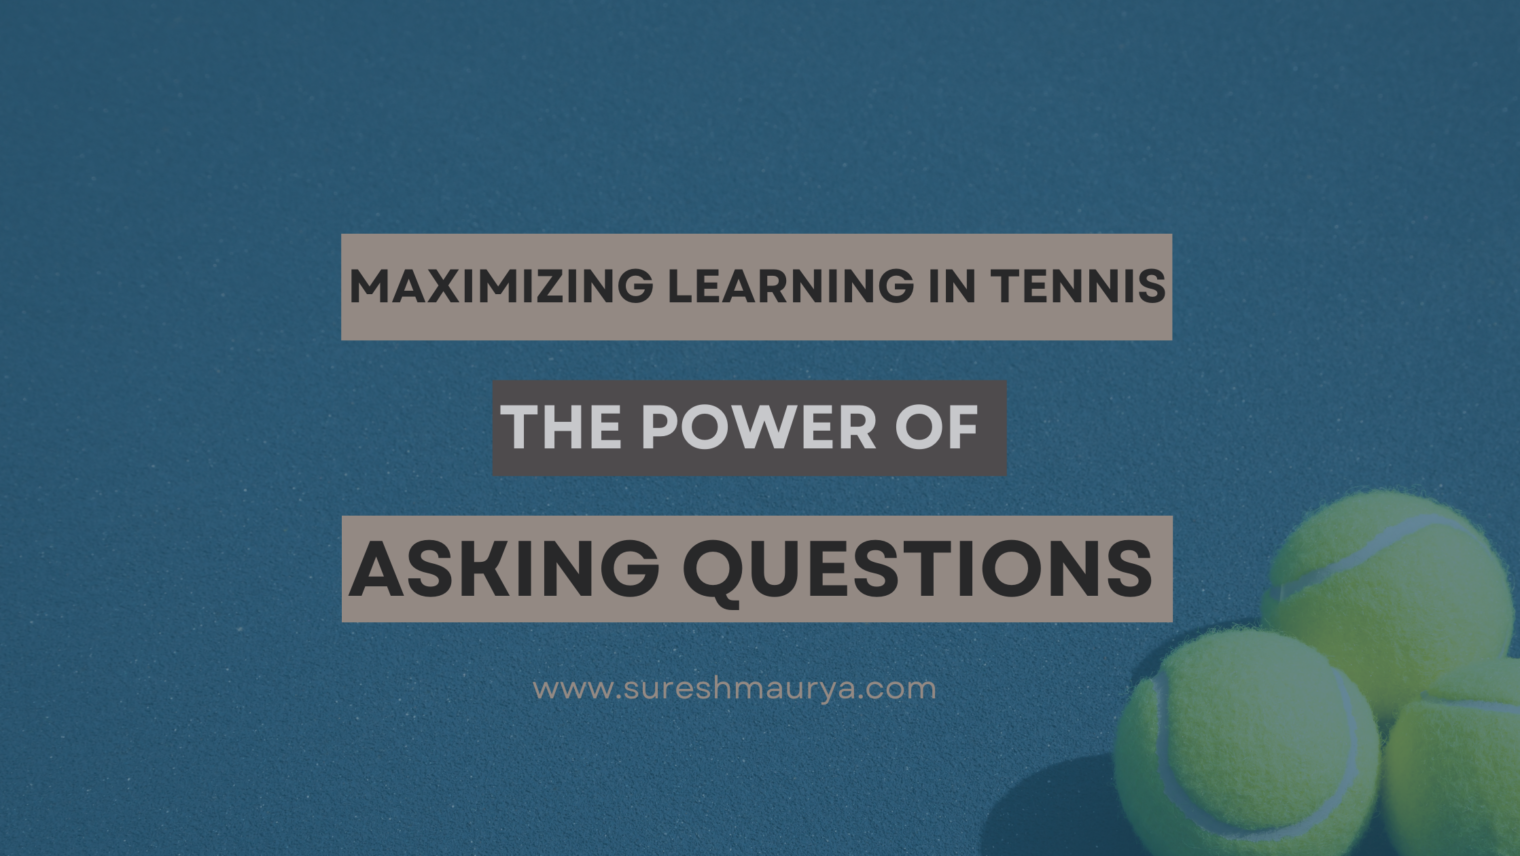 ￼Maximizing Learning in Tennis: The Power of Asking Questions